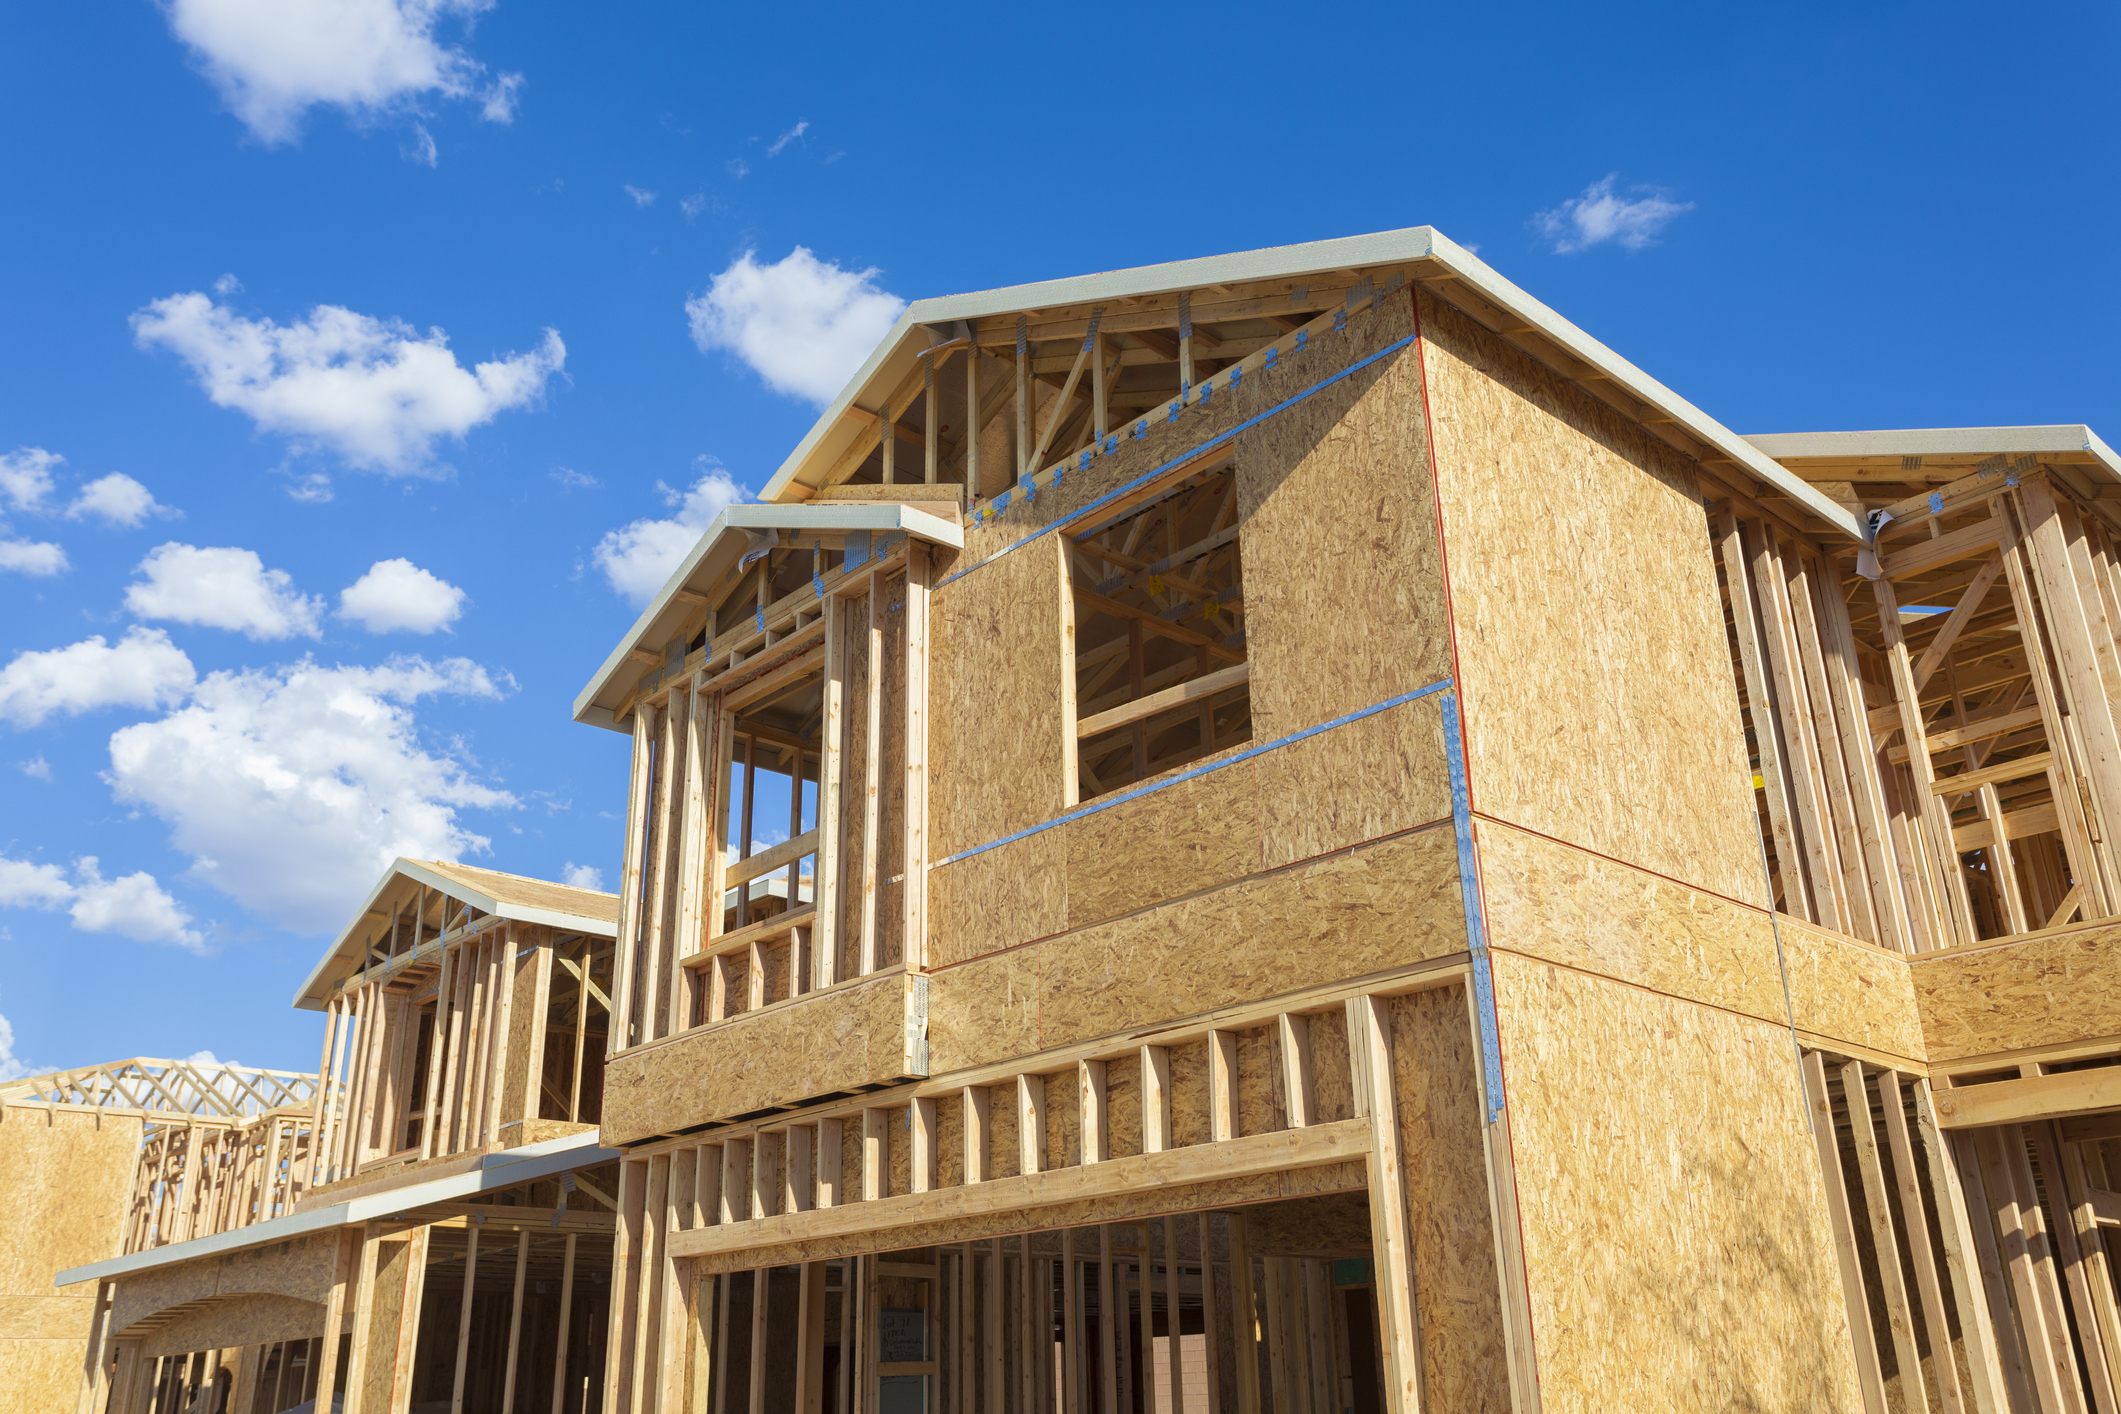 Home Construction Loans Explained - Bankrate